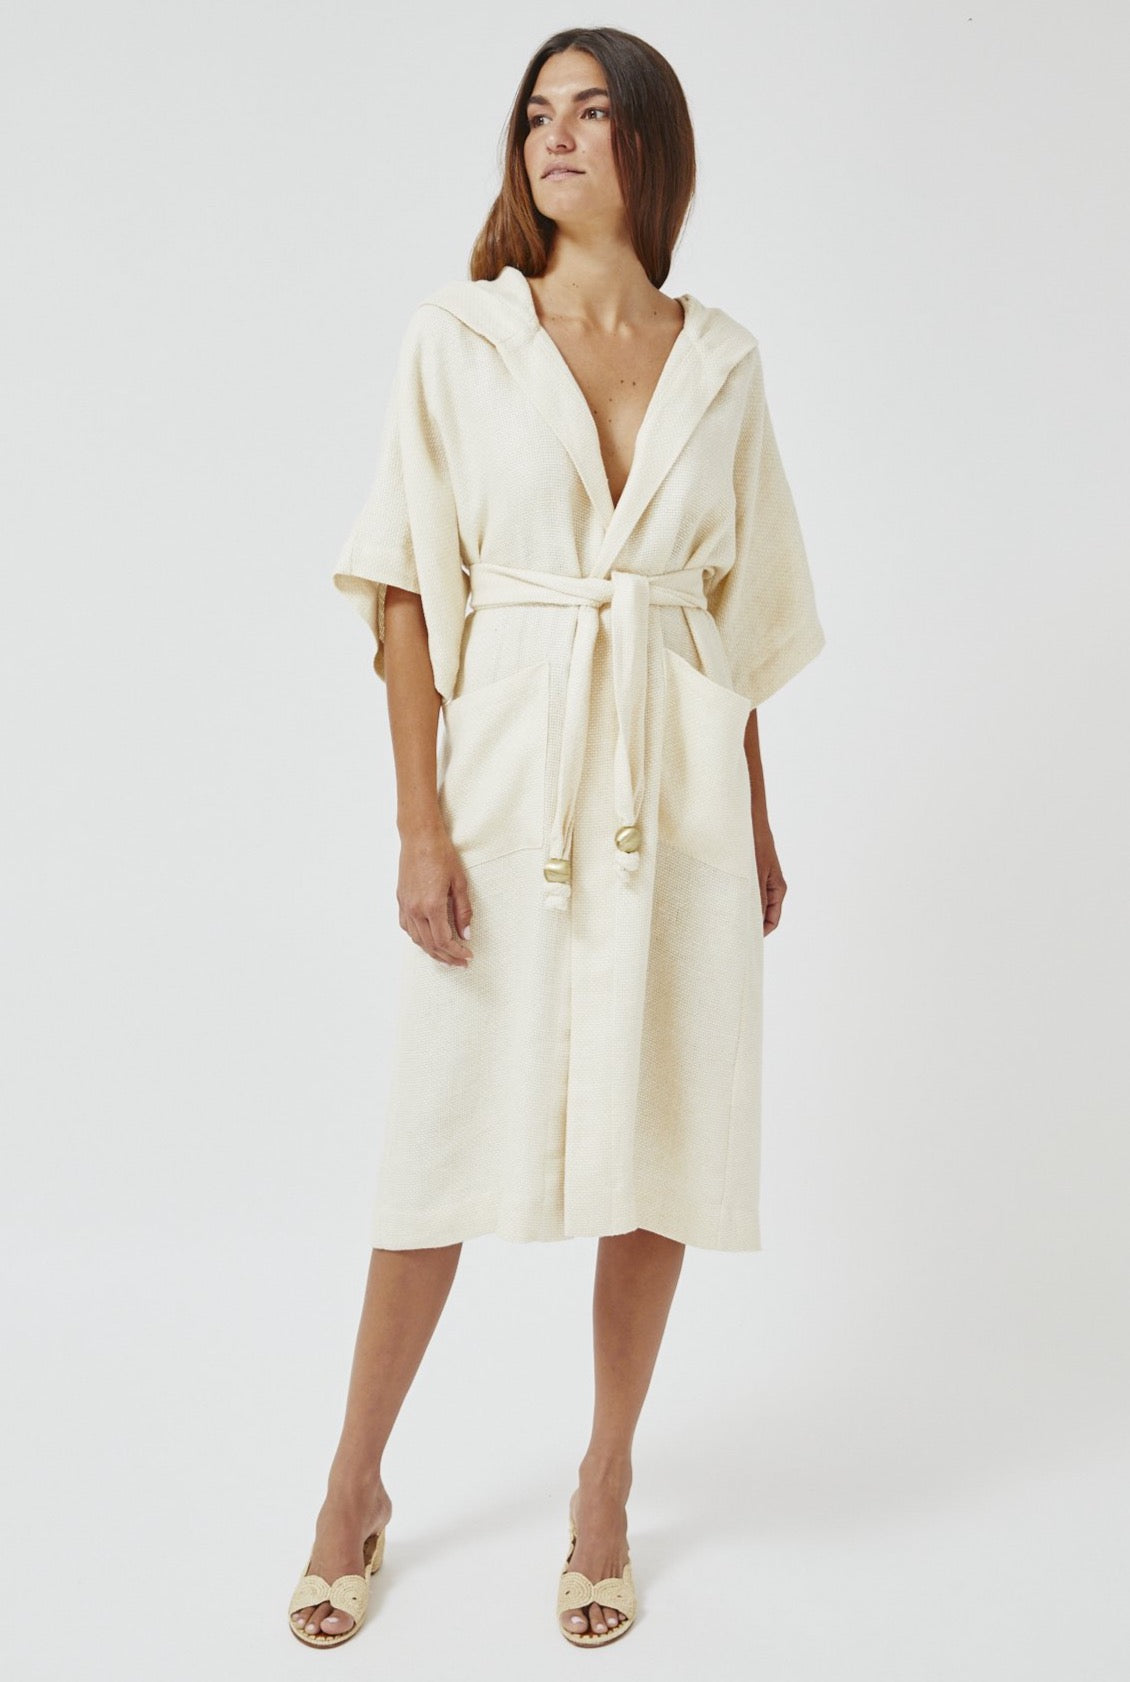 HOODED SAND HONEYCOMB LINEN DRESSING GOWN LONG